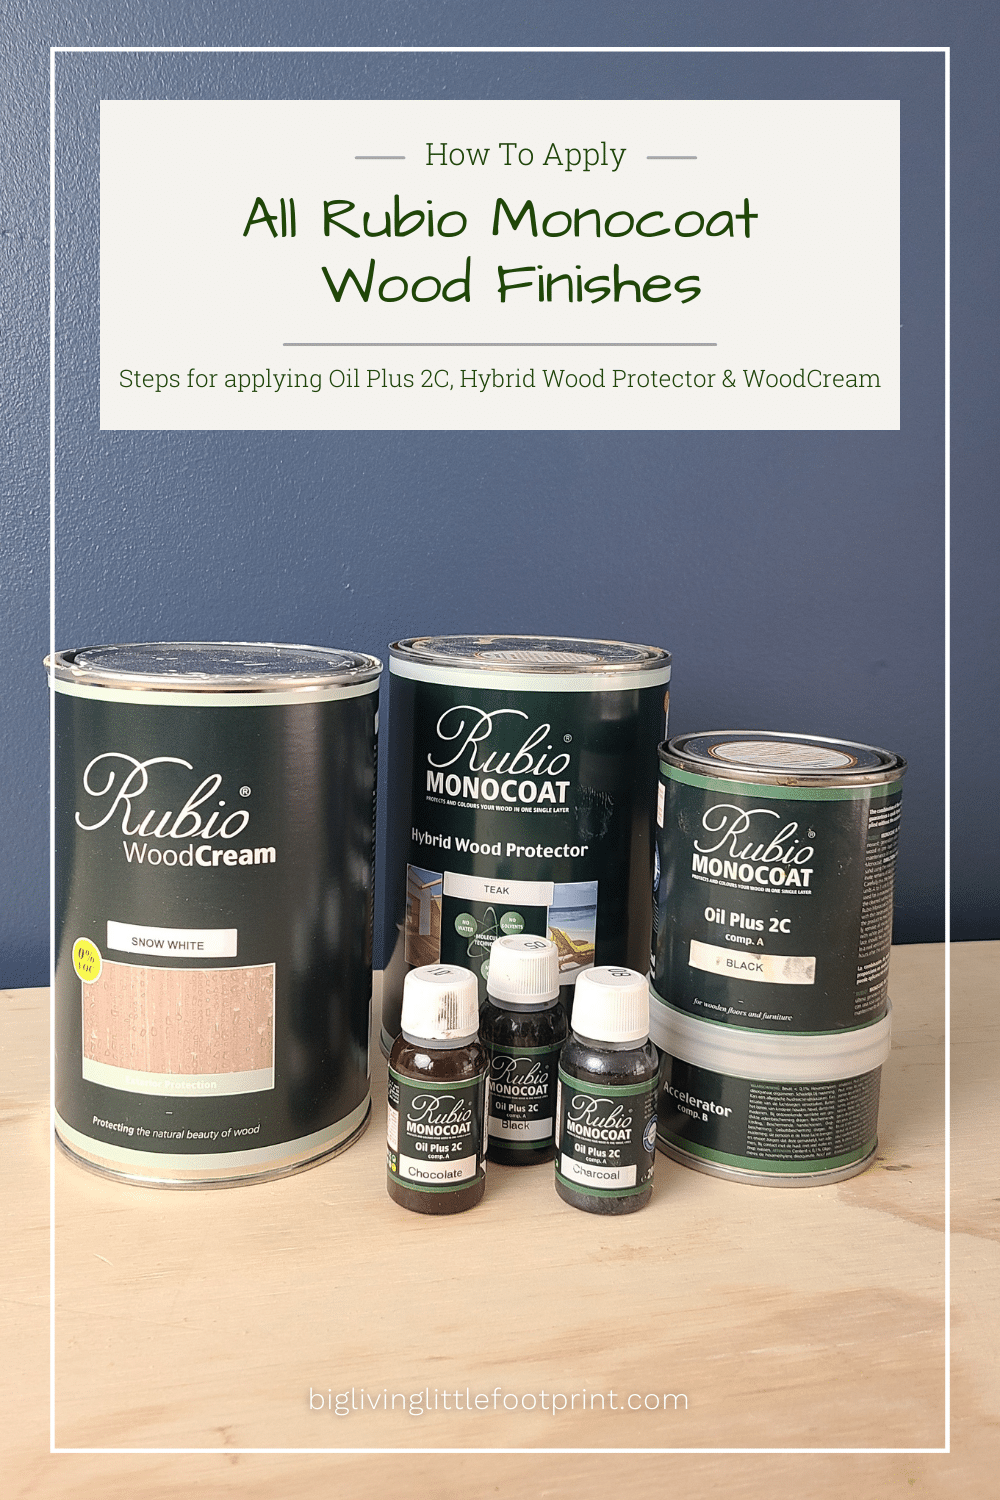 How To Apply All Rubio Monocoat Wood Finishes For The Best Result